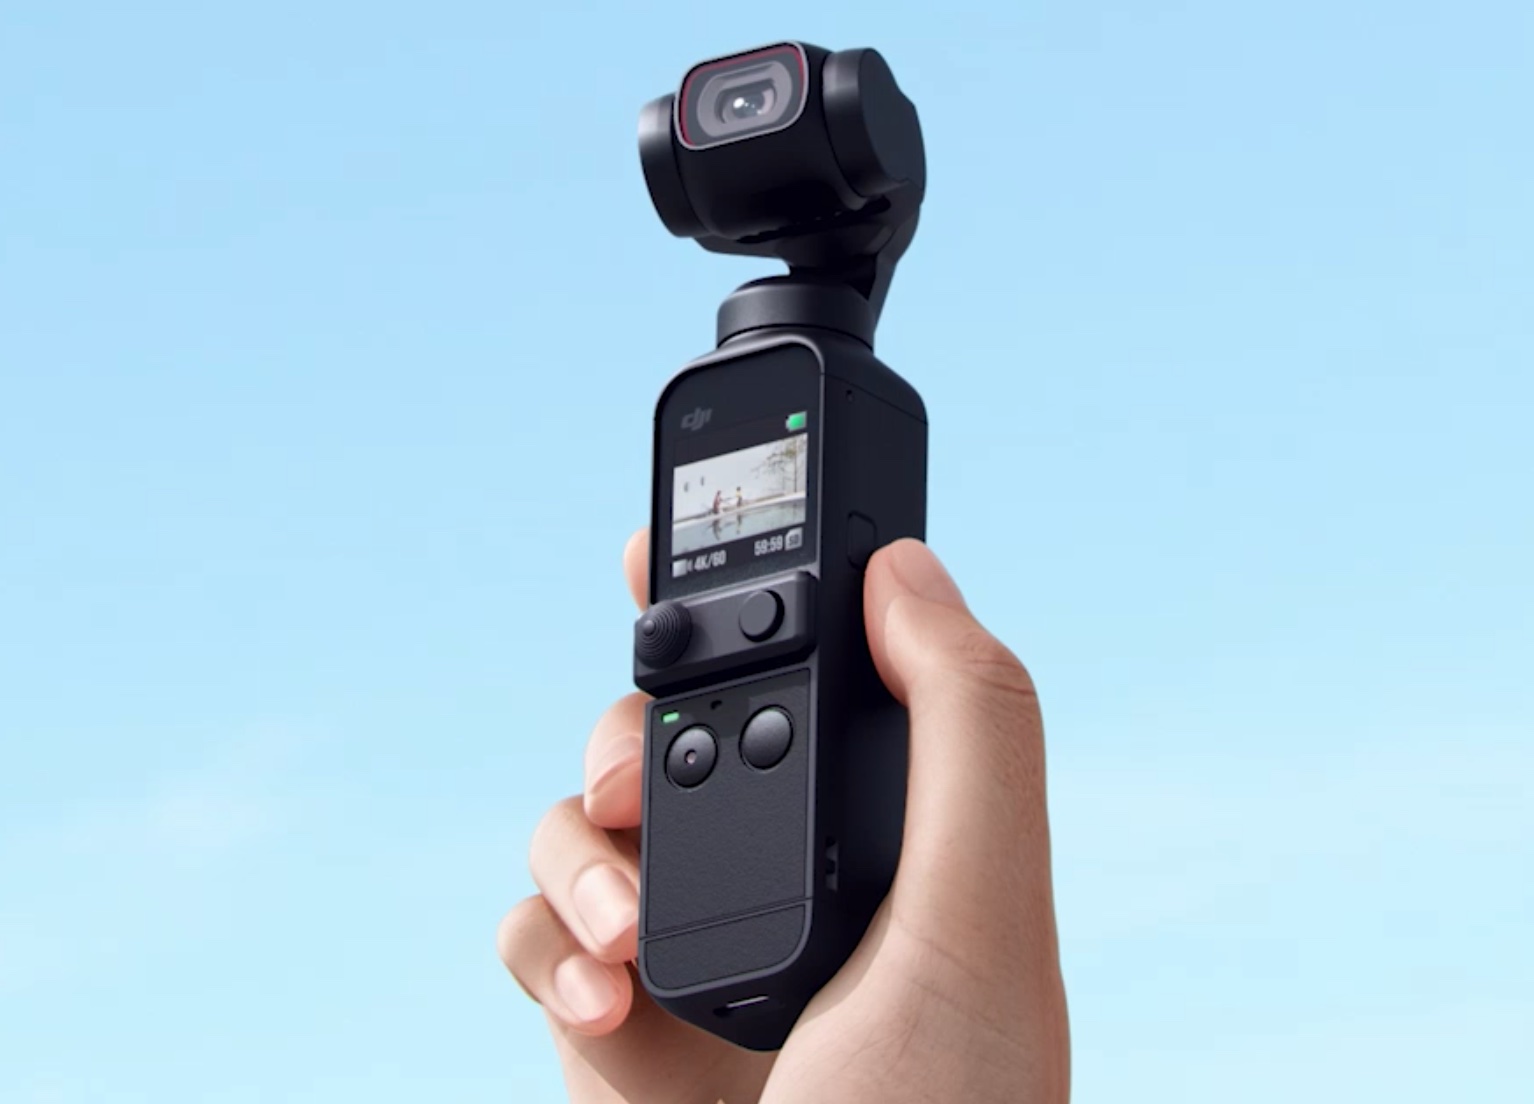 DJI releases Pocket 2 camera, prices start at around $374 - CnTechPost